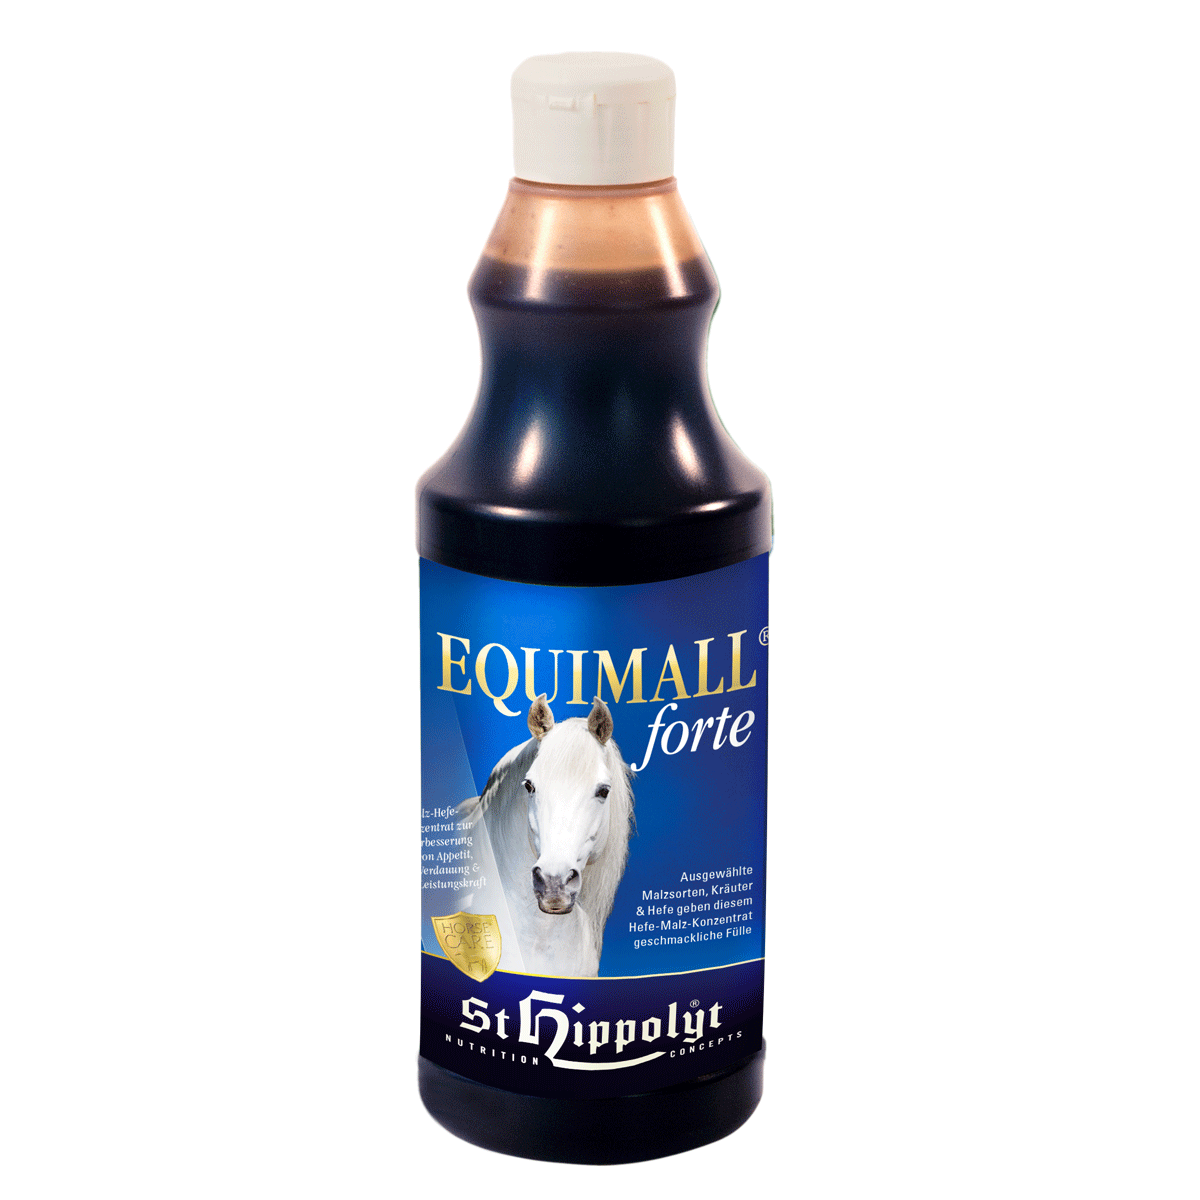 Equimall forte 700ml.